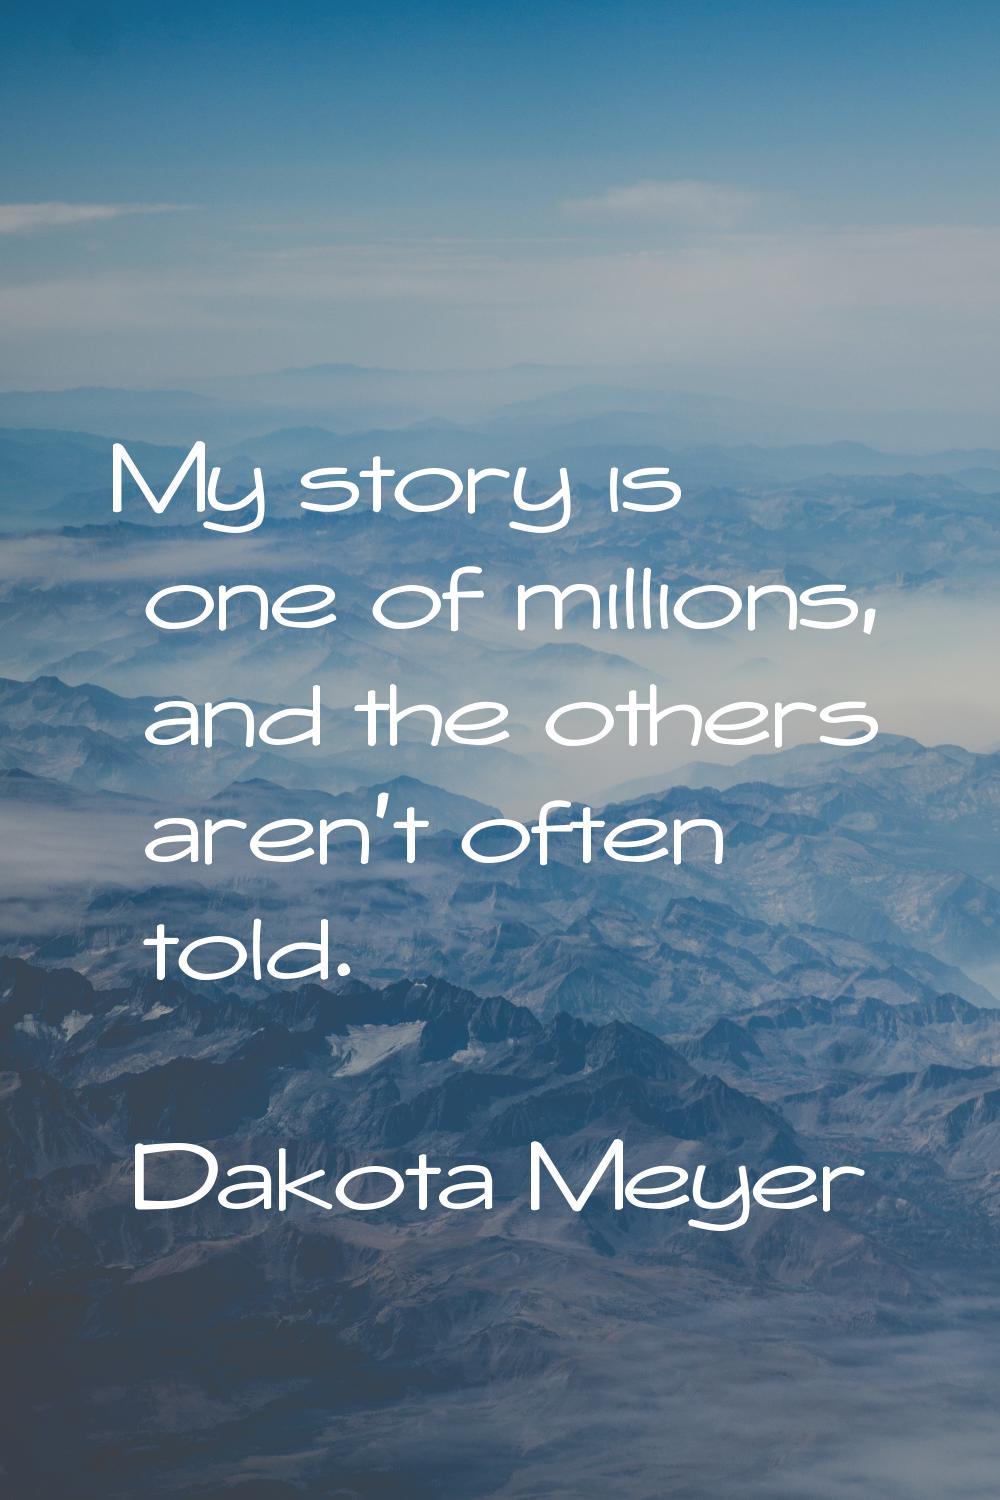 My story is one of millions, and the others aren't often told.